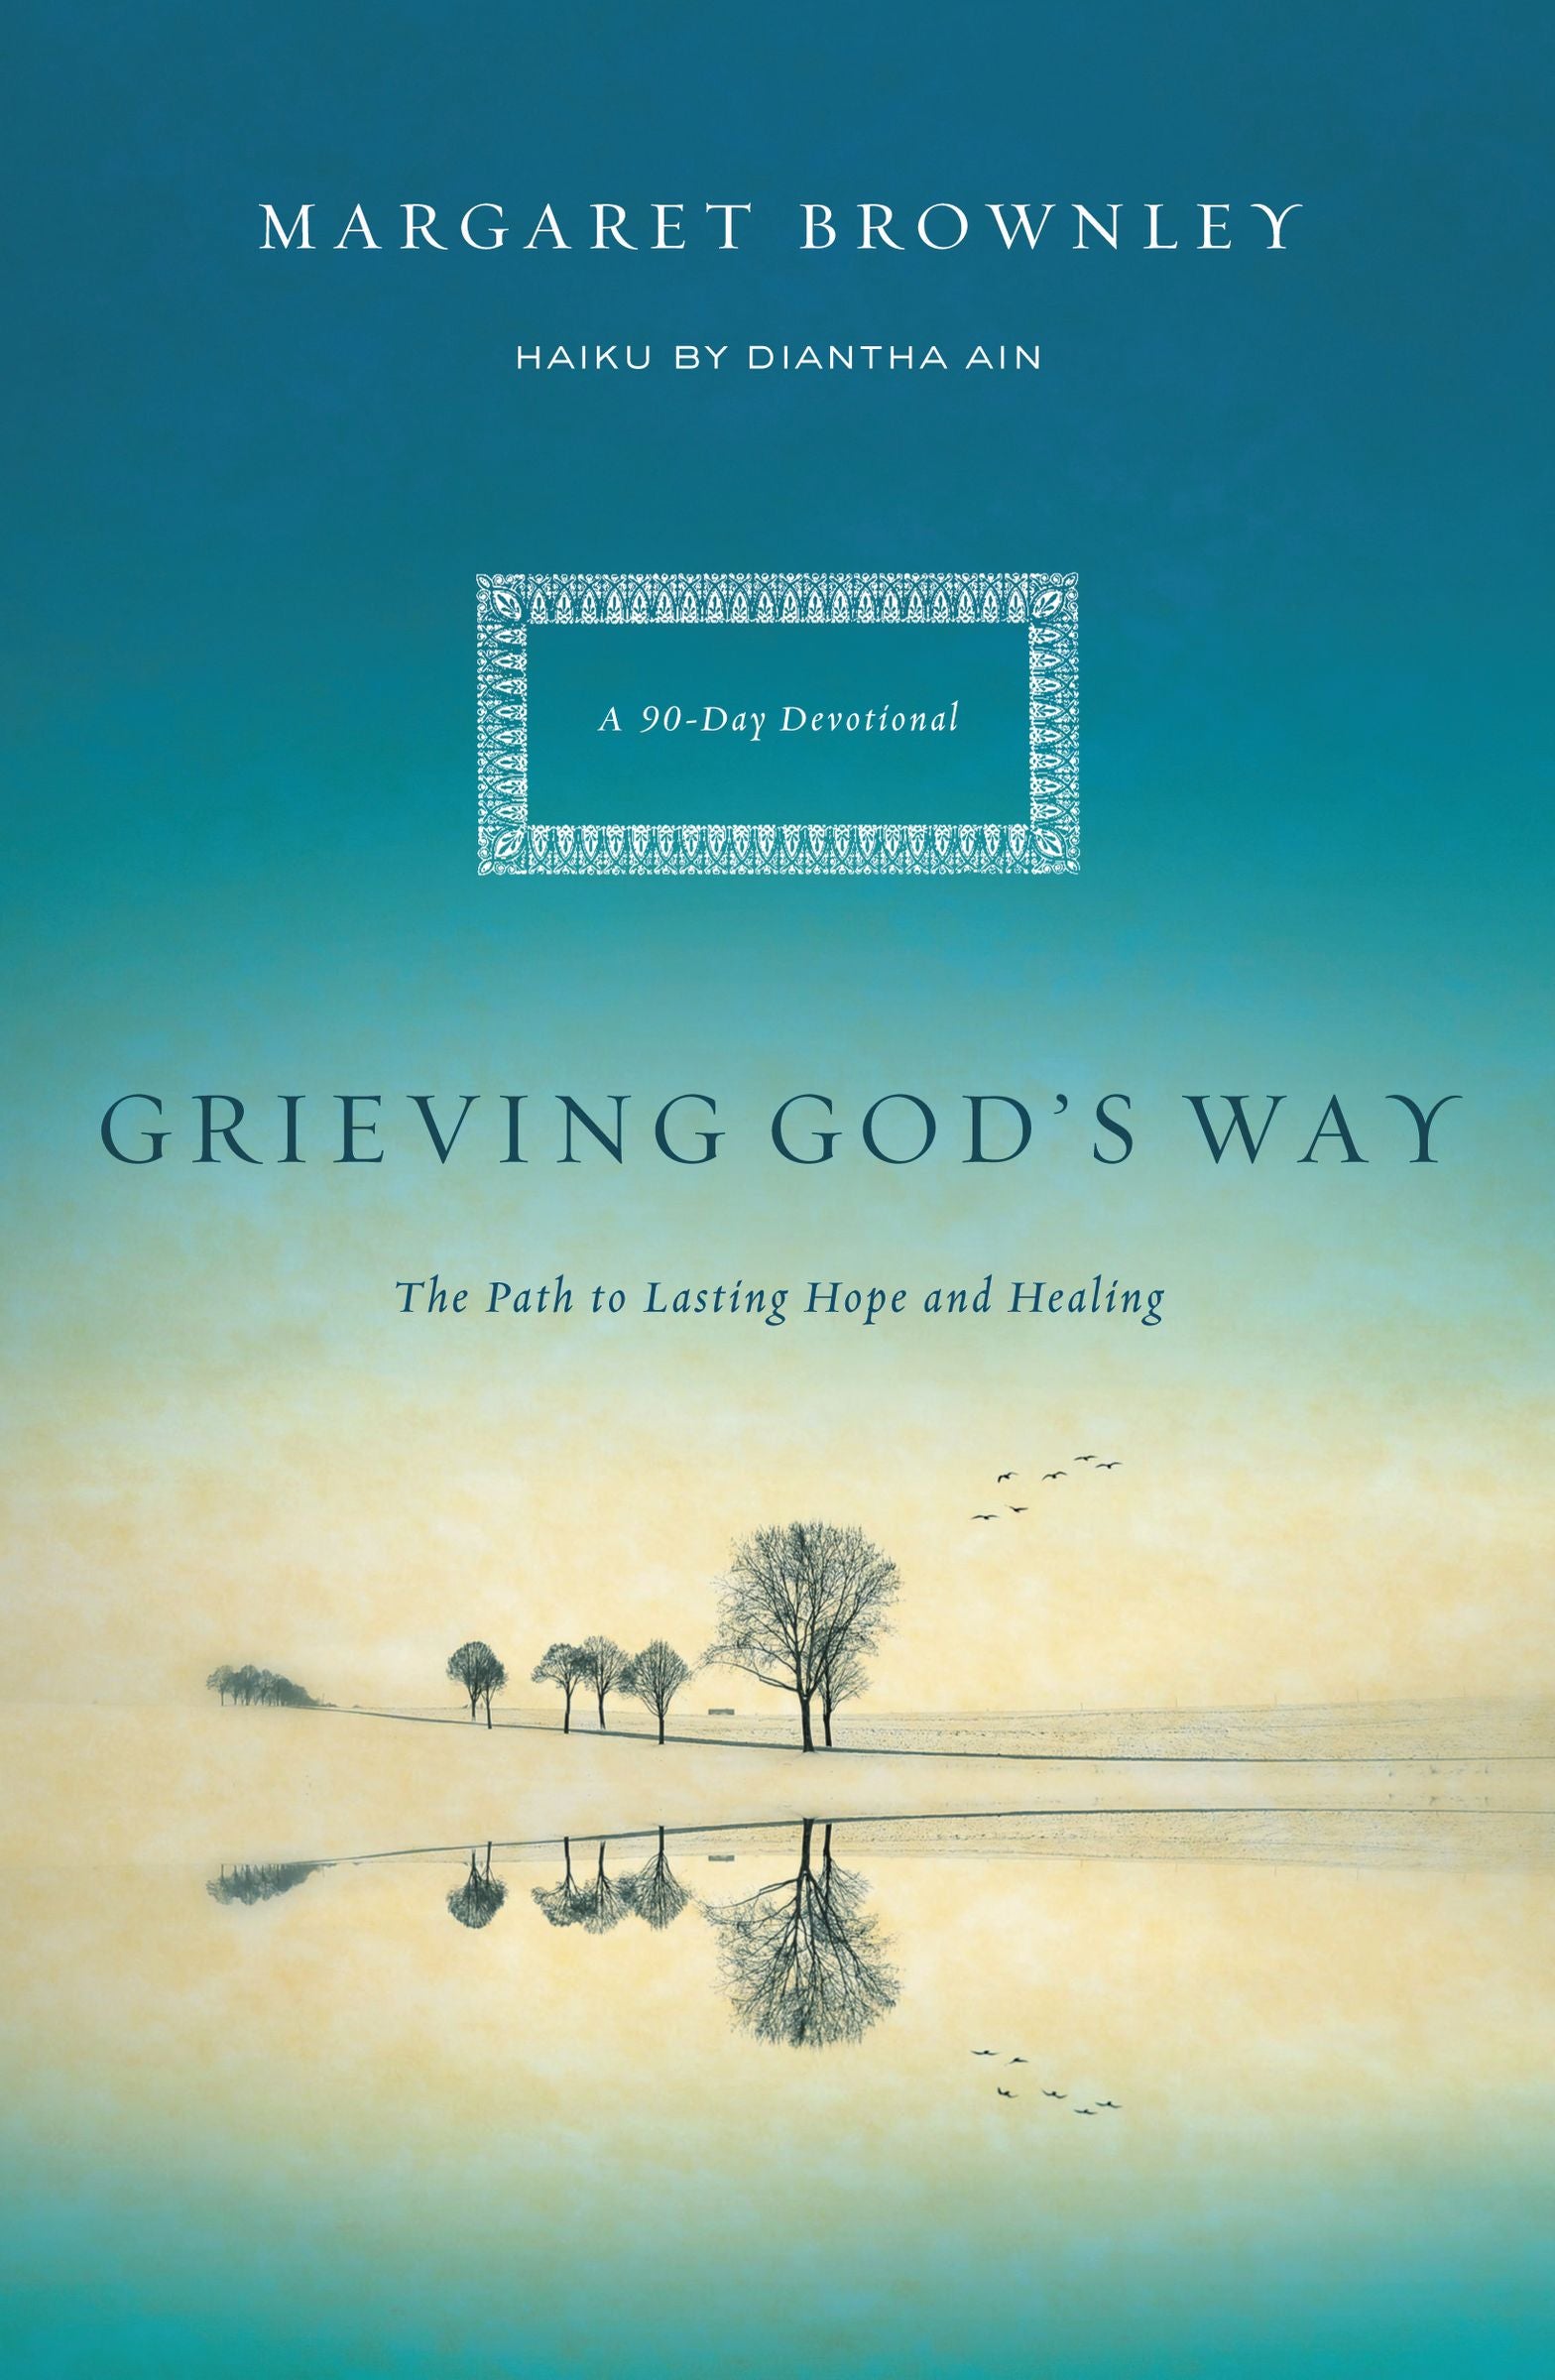 Image of Grieving Gods Way other